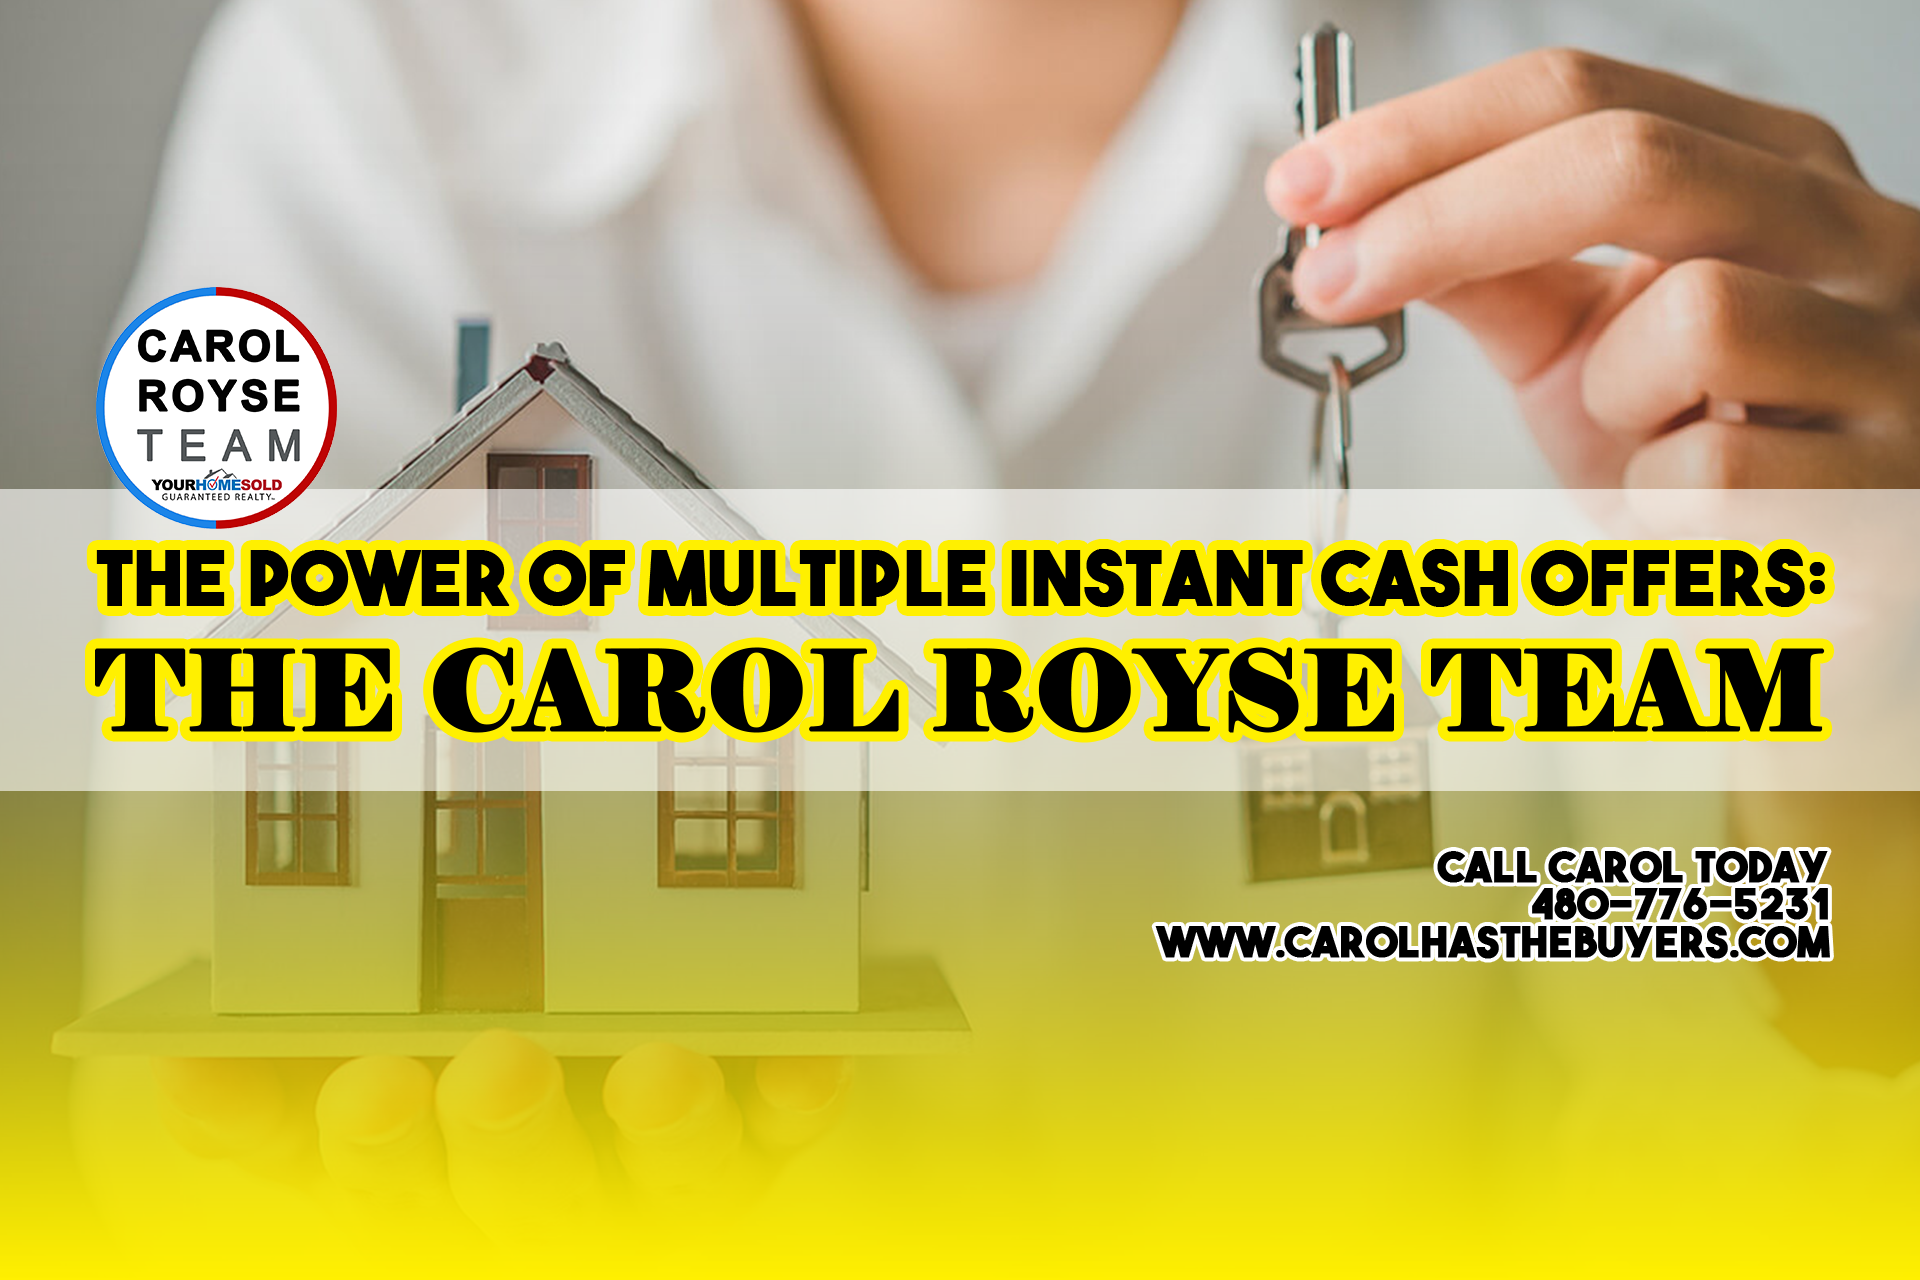 The Power of Multiple Instant Cash Offers: The Carol Royse Team